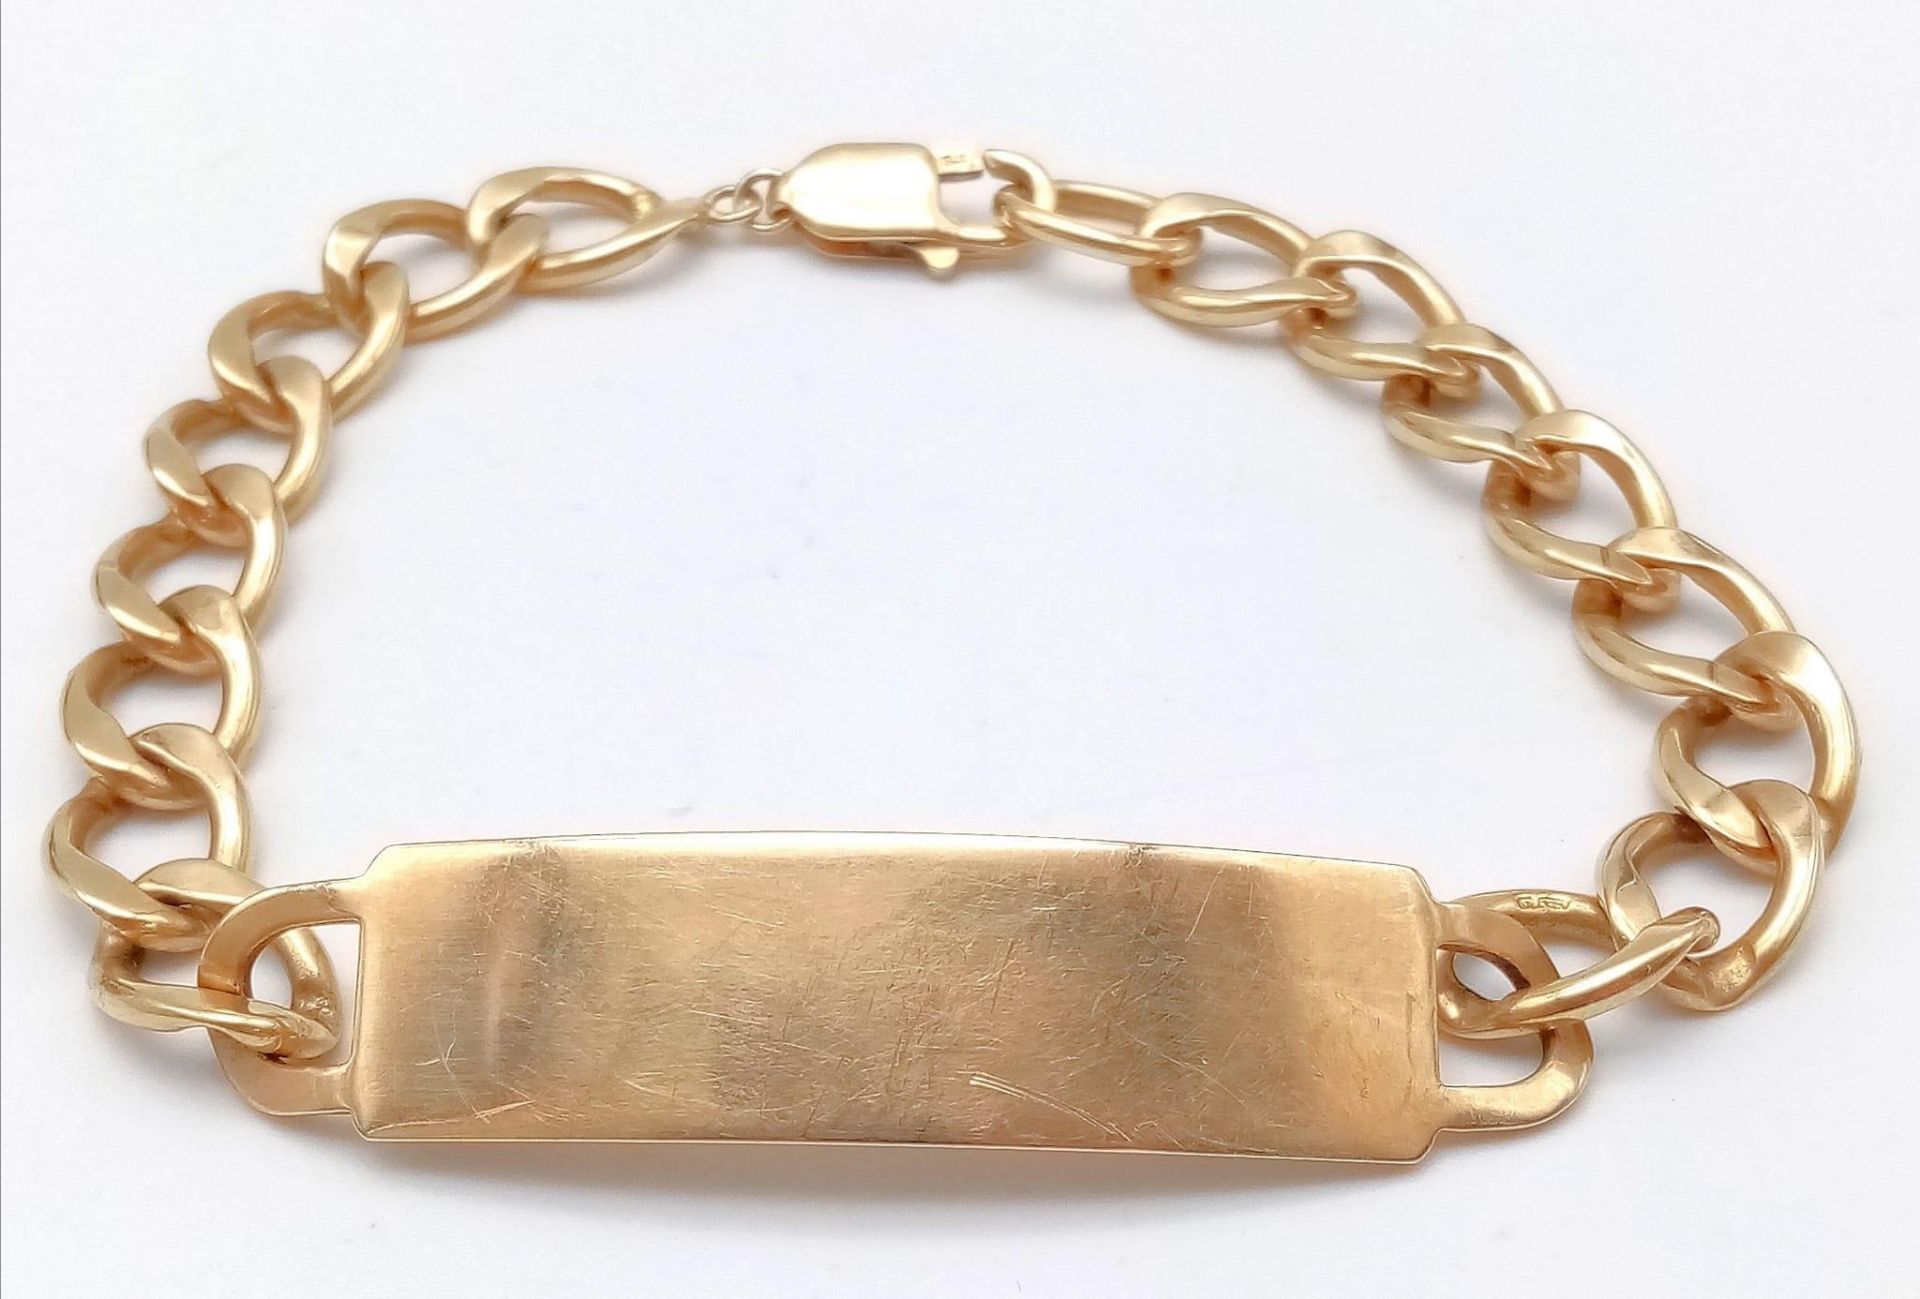 A vintage 9K Gold Curb Chain Men's ID Bracelet. Fully hallmarked, measures 22cm in length. Not